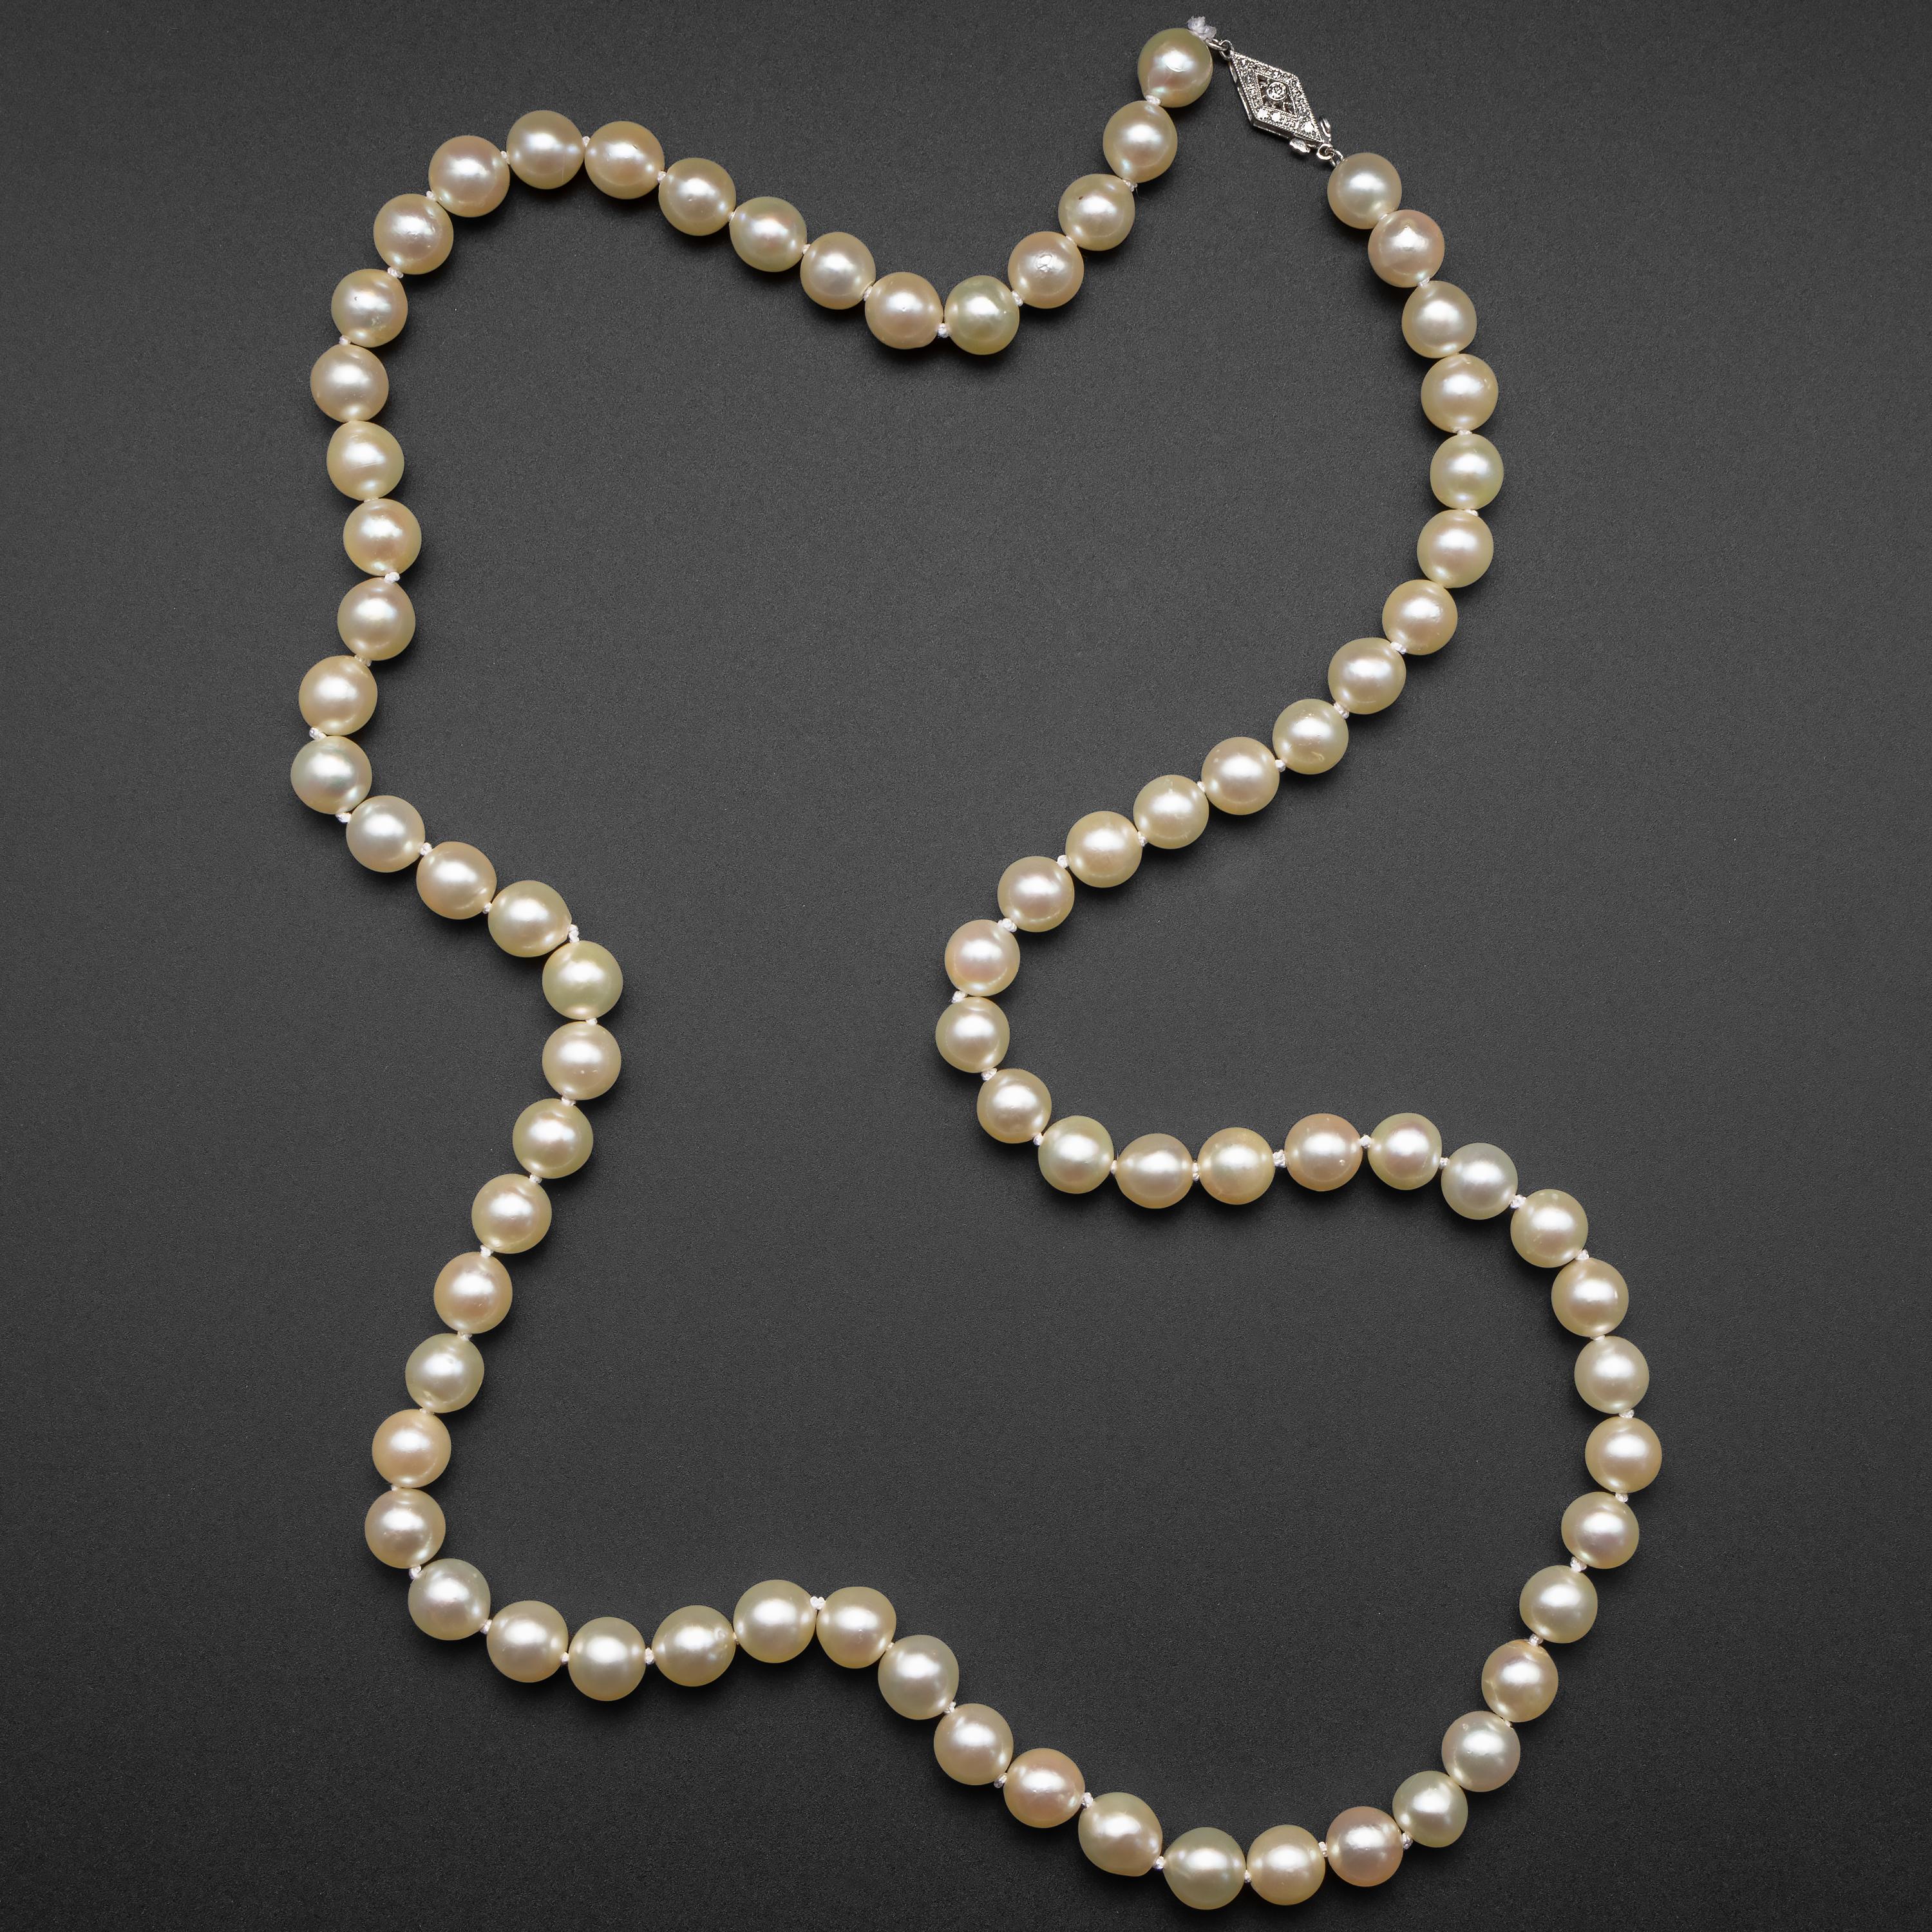 This 1940's necklace is composed of seventy-five luminous cultured Akoya pearls measuring approximately 7.72mm - 8.52mm. The pearls are not graduated because their sizes are so similar; the effect is that of a unified strand of 8mm cultured pearls.